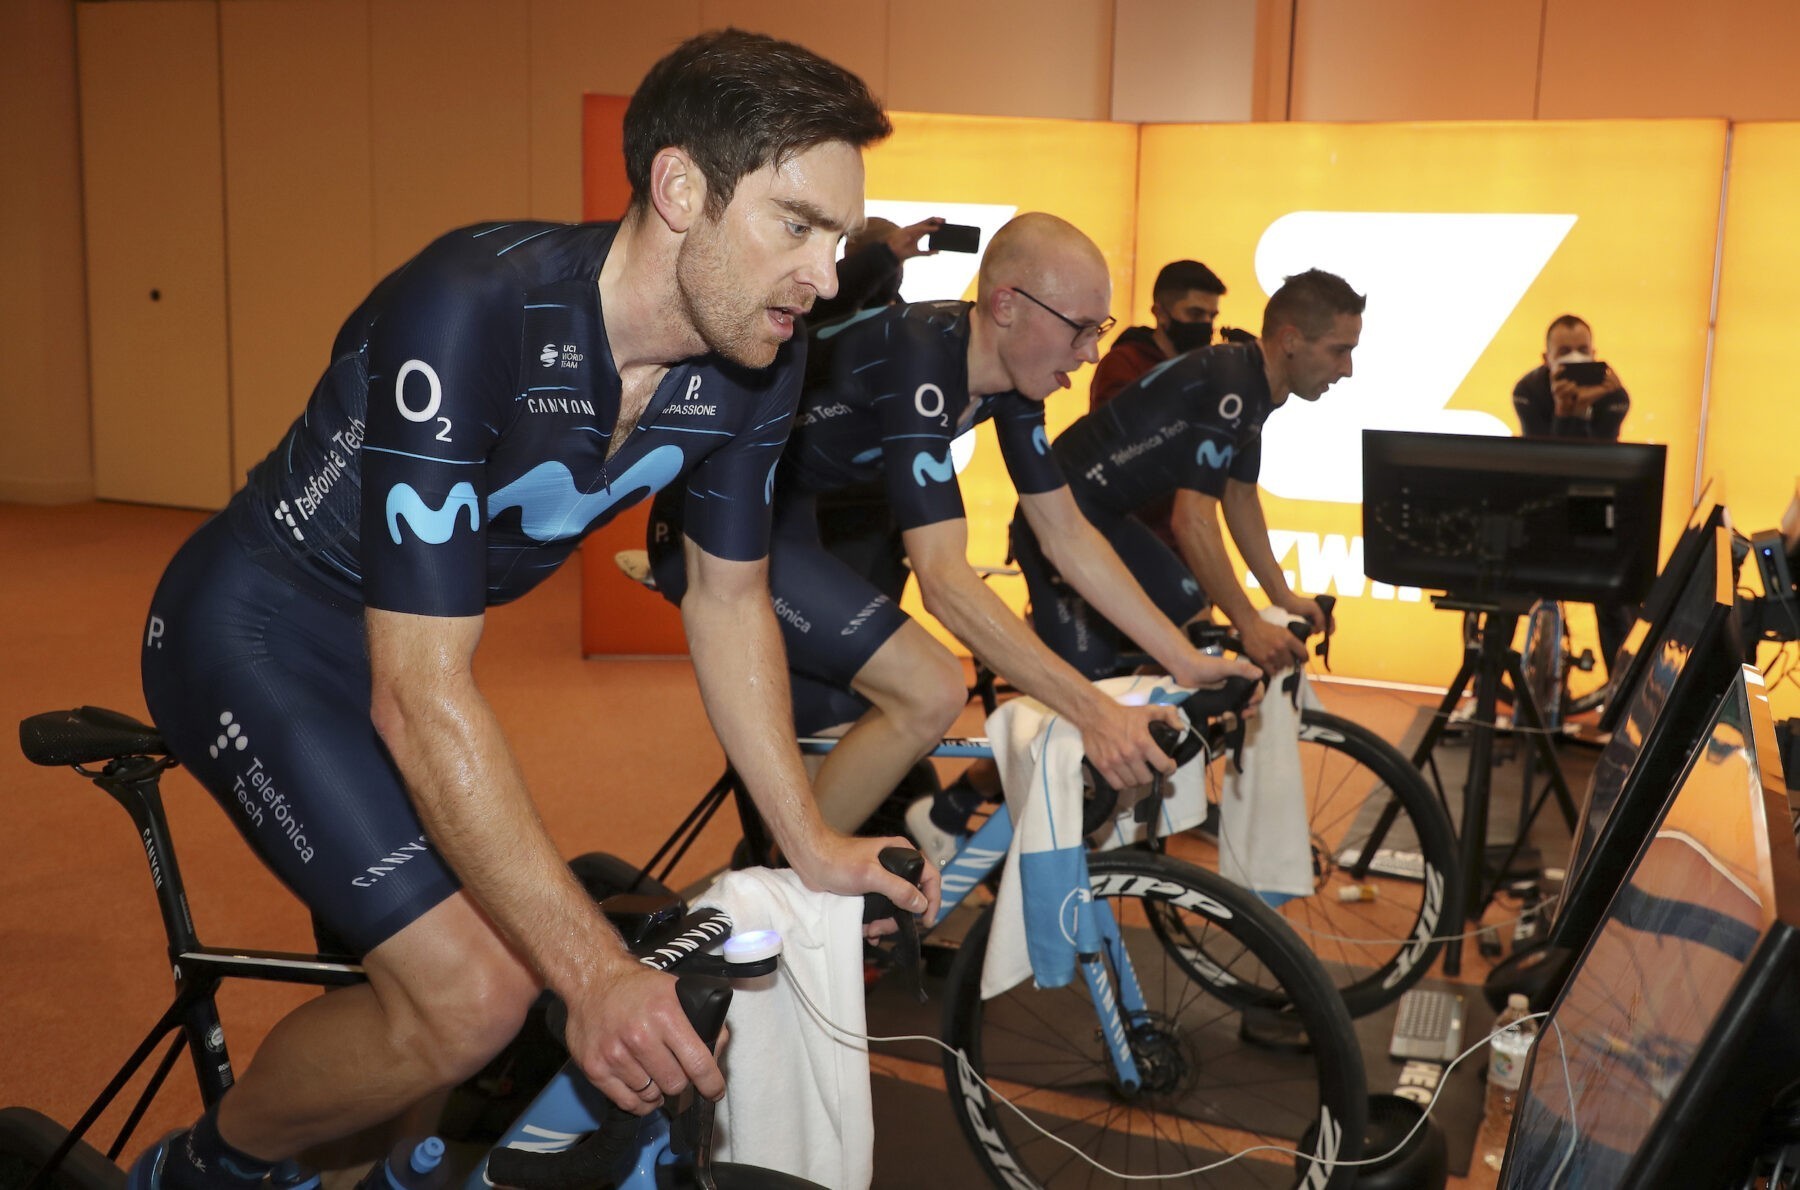 Movistar eTeam competes at Zwift Racing League from Almería camp